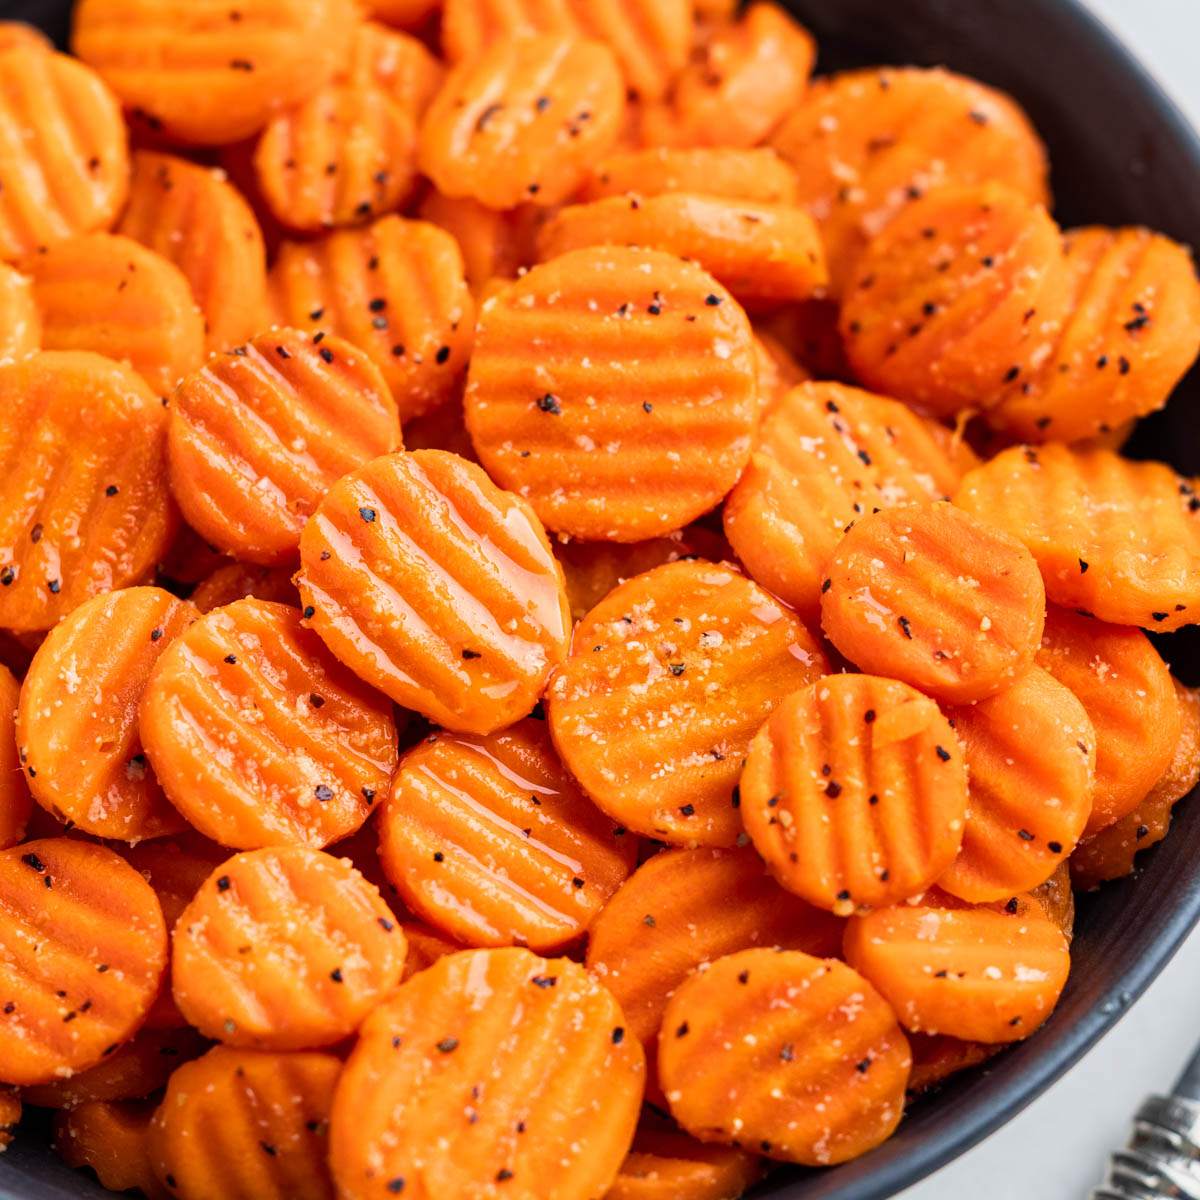 Cooked carrots.